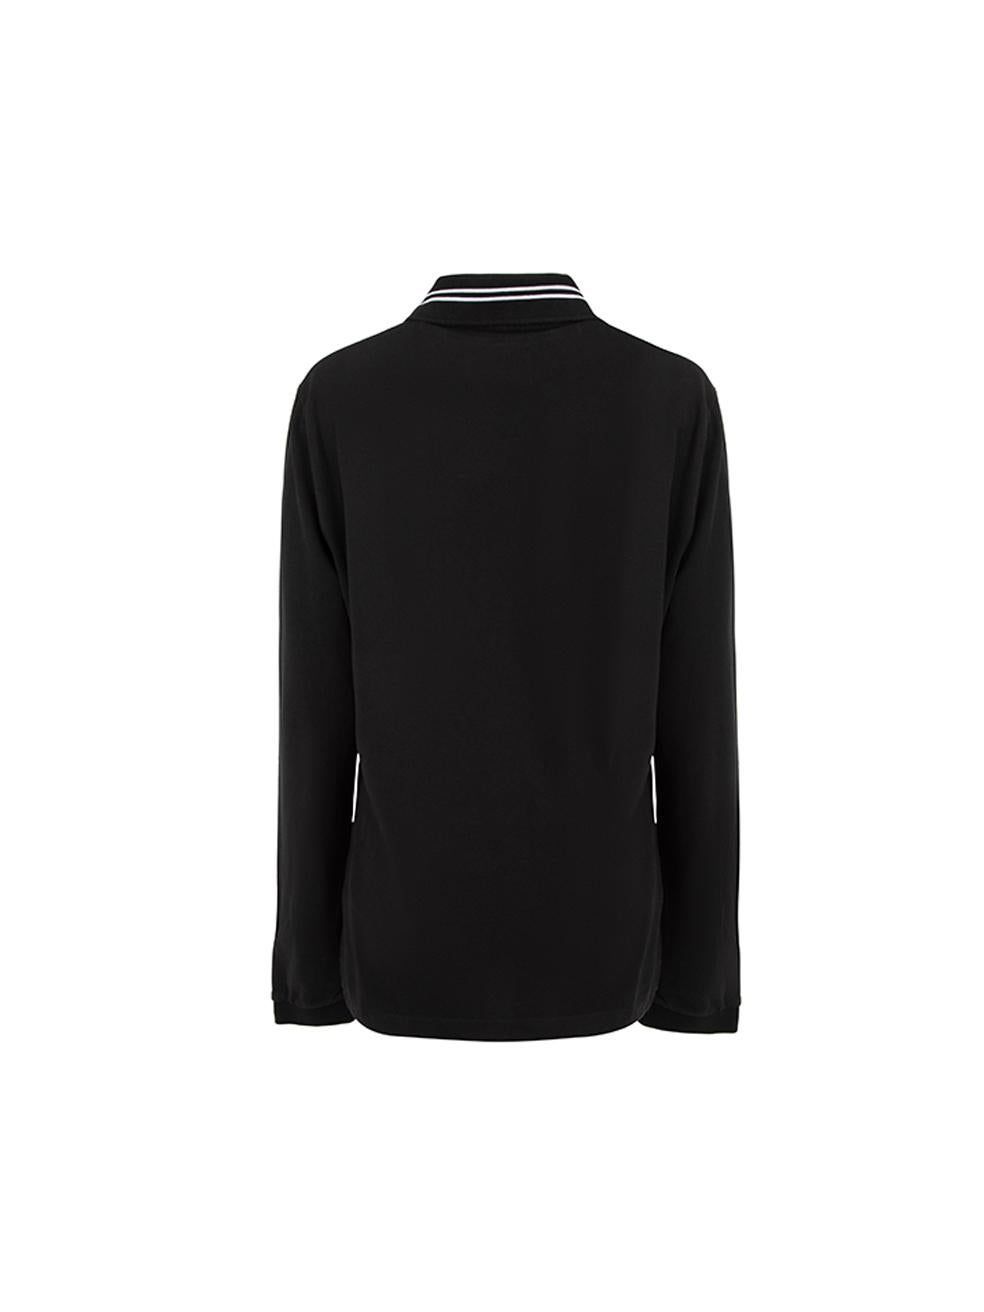 Vivienne Westwood Women's Black Long Sleeves Polo Shirt In Good Condition For Sale In London, GB